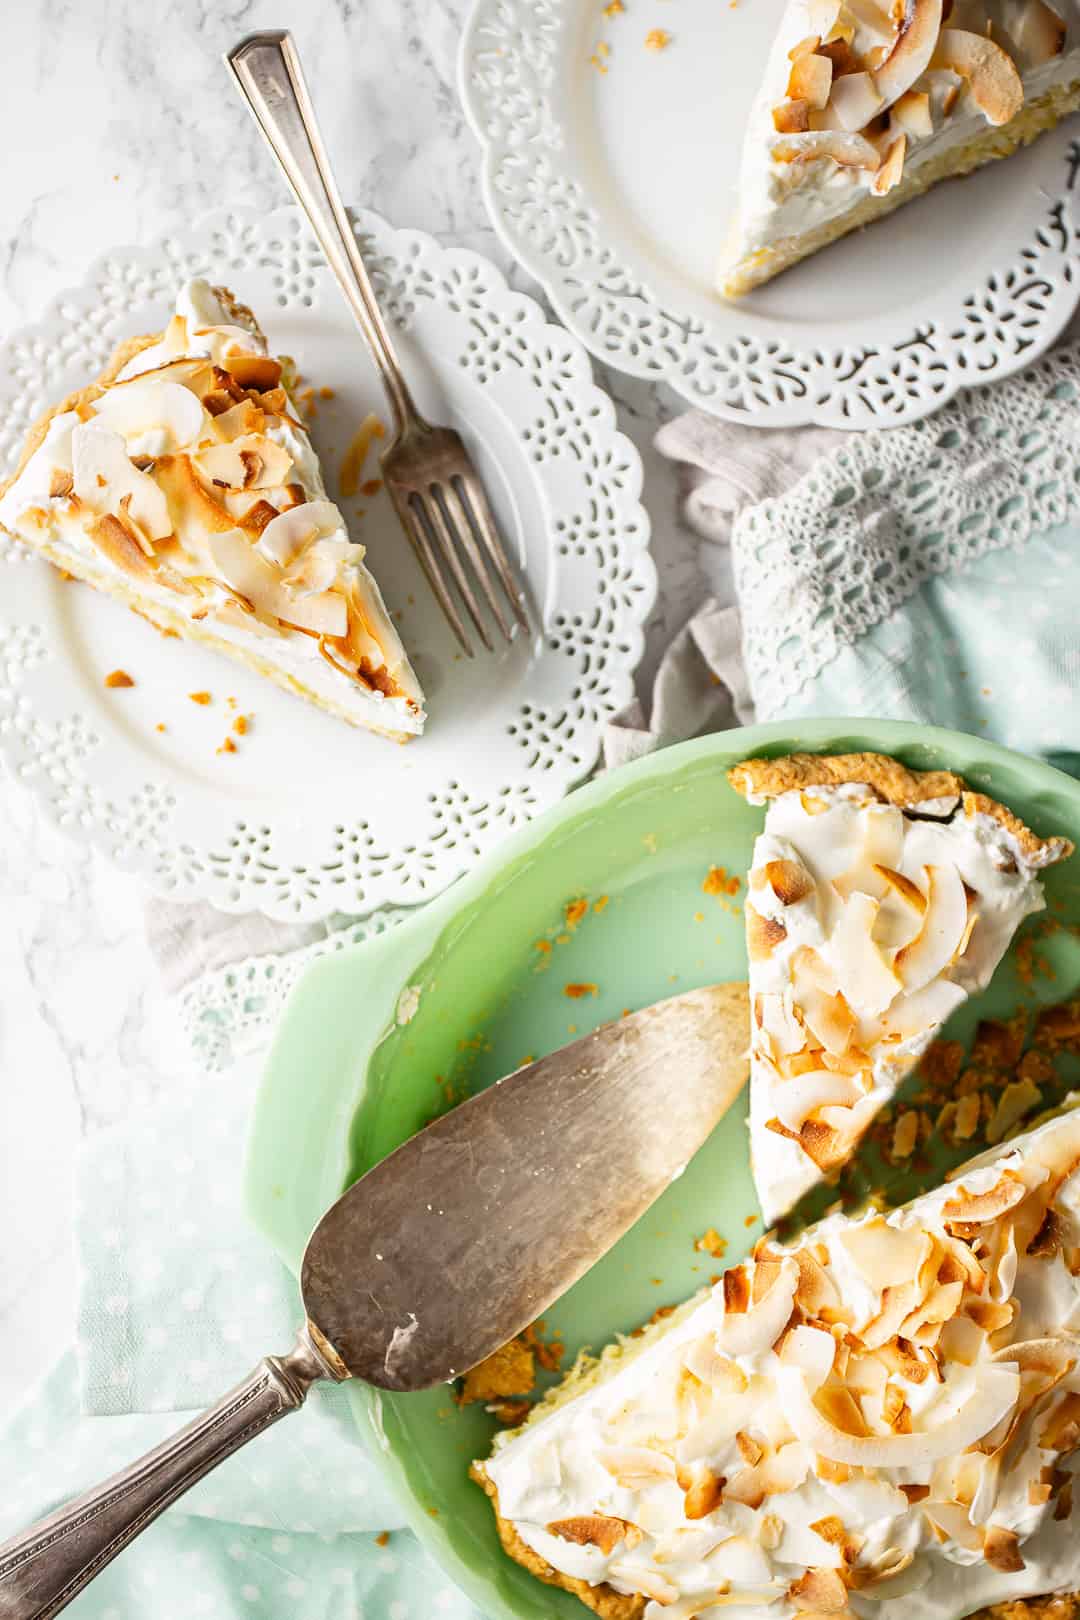 Coconut cream pie being served on white plates.